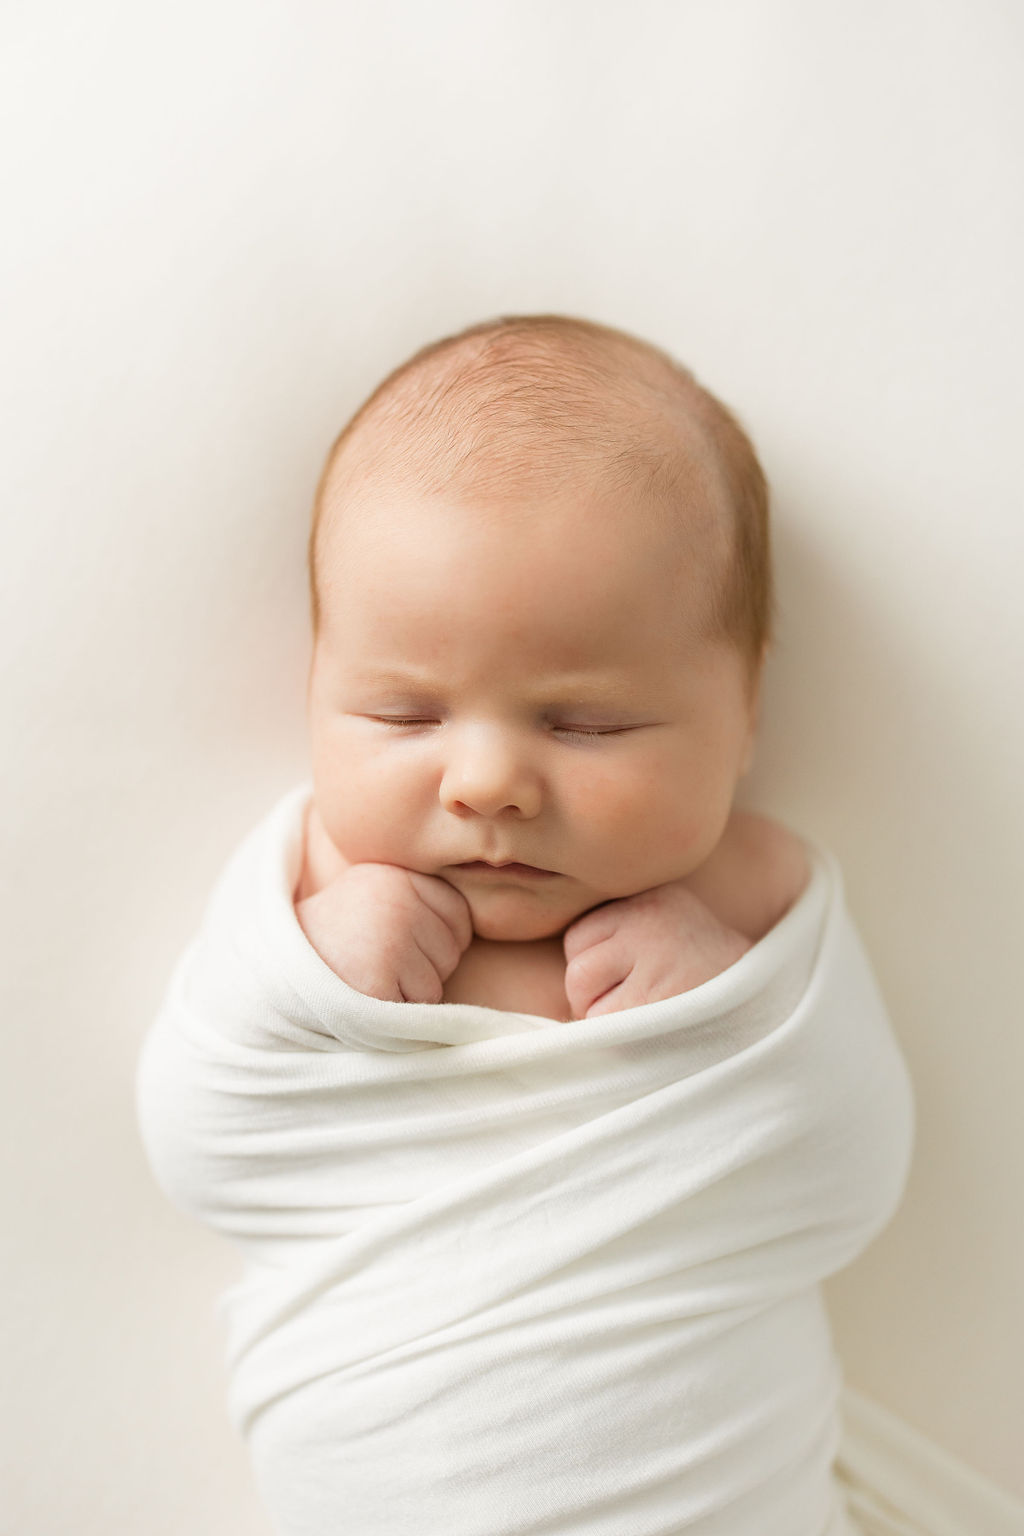 A newborn baby sleeps in a white swaddle on a white bed with hands in fists our birthing center